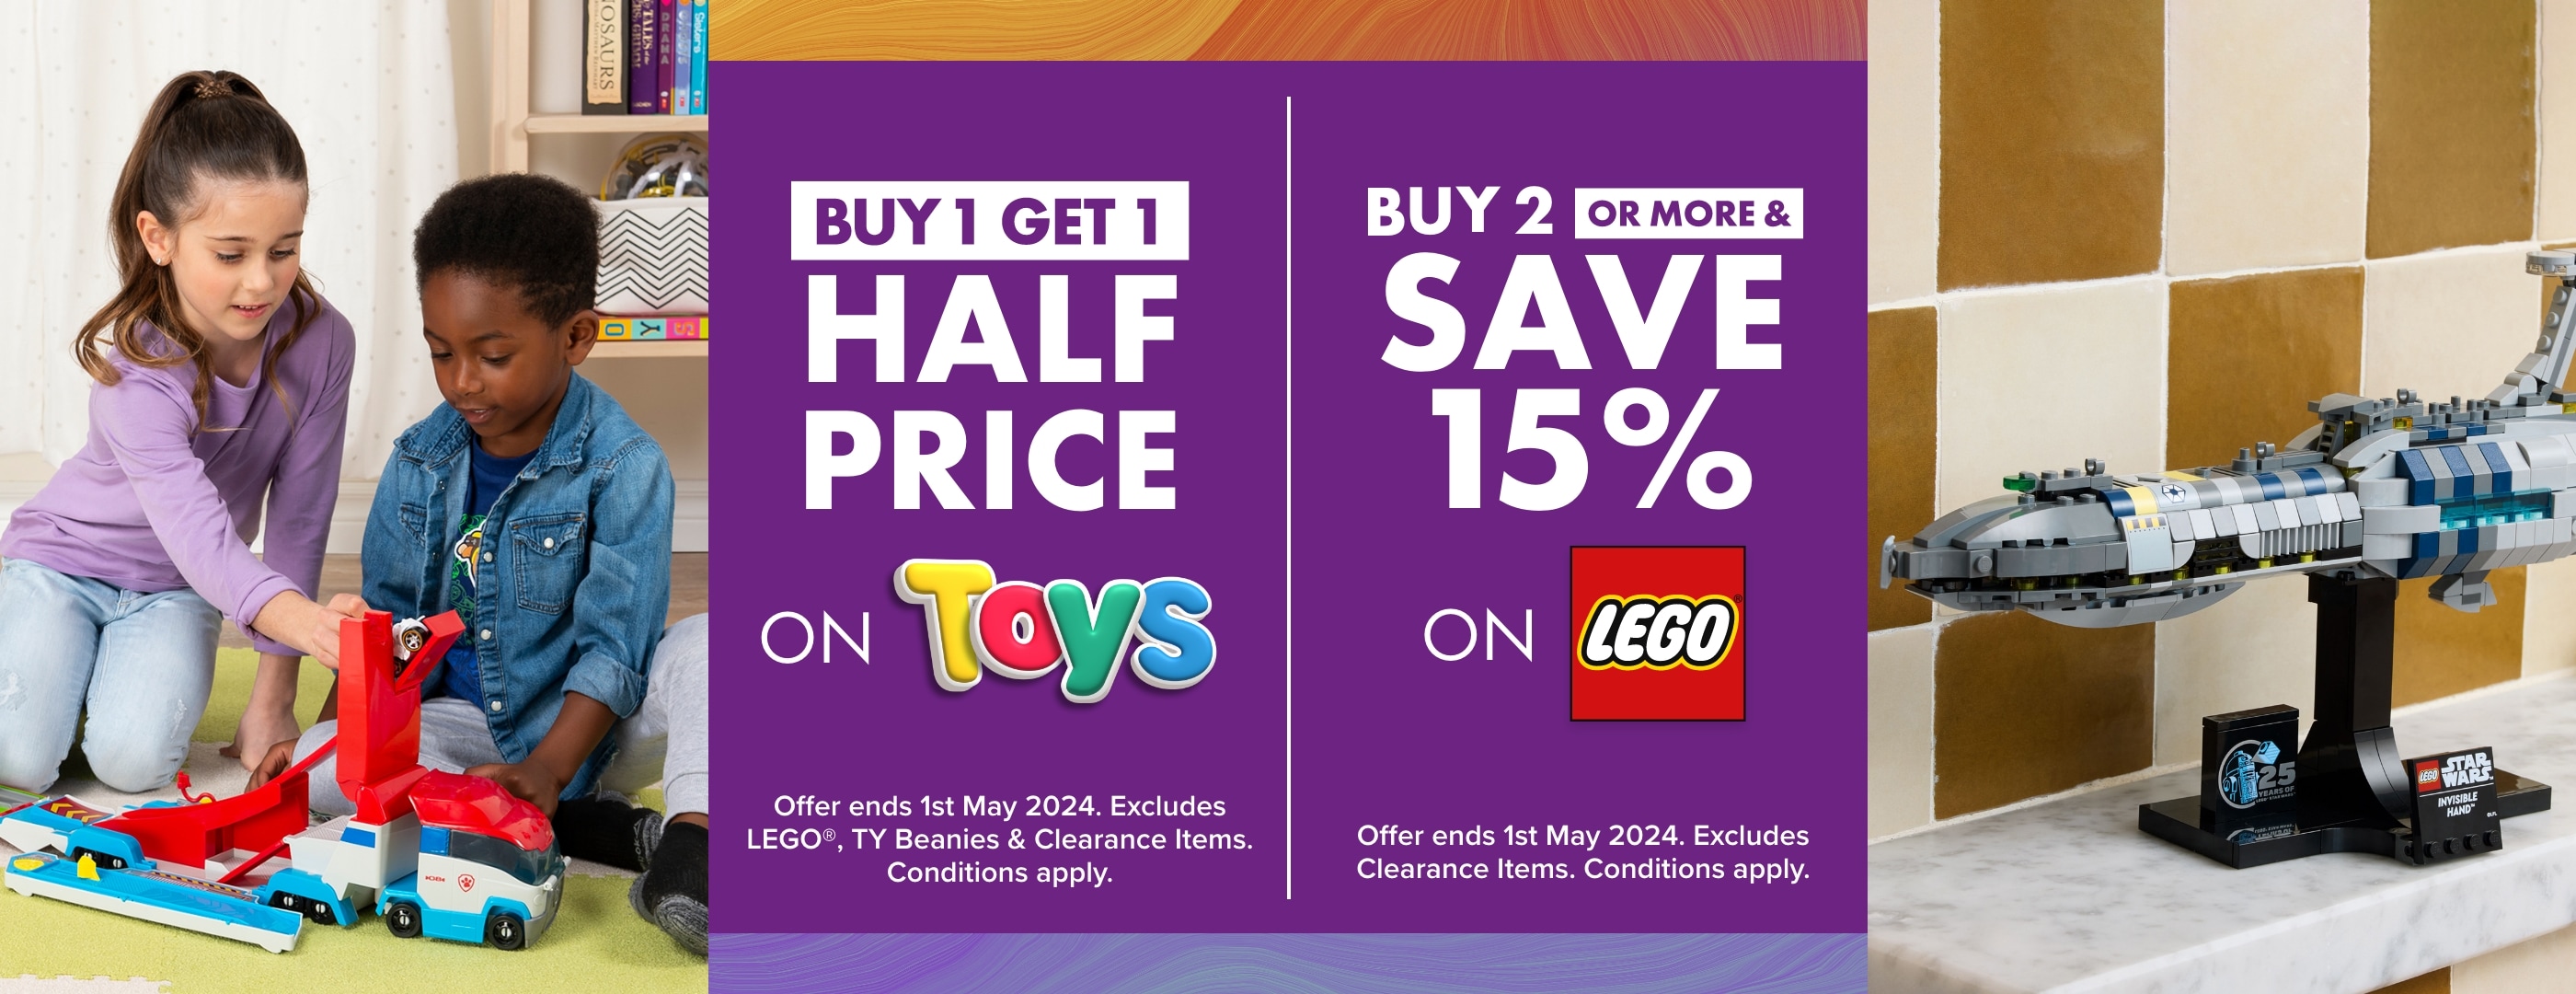 BUY 1 GET 1 HALF PRICE on Toys | Buy 2 or more & save 15% on LEGO®